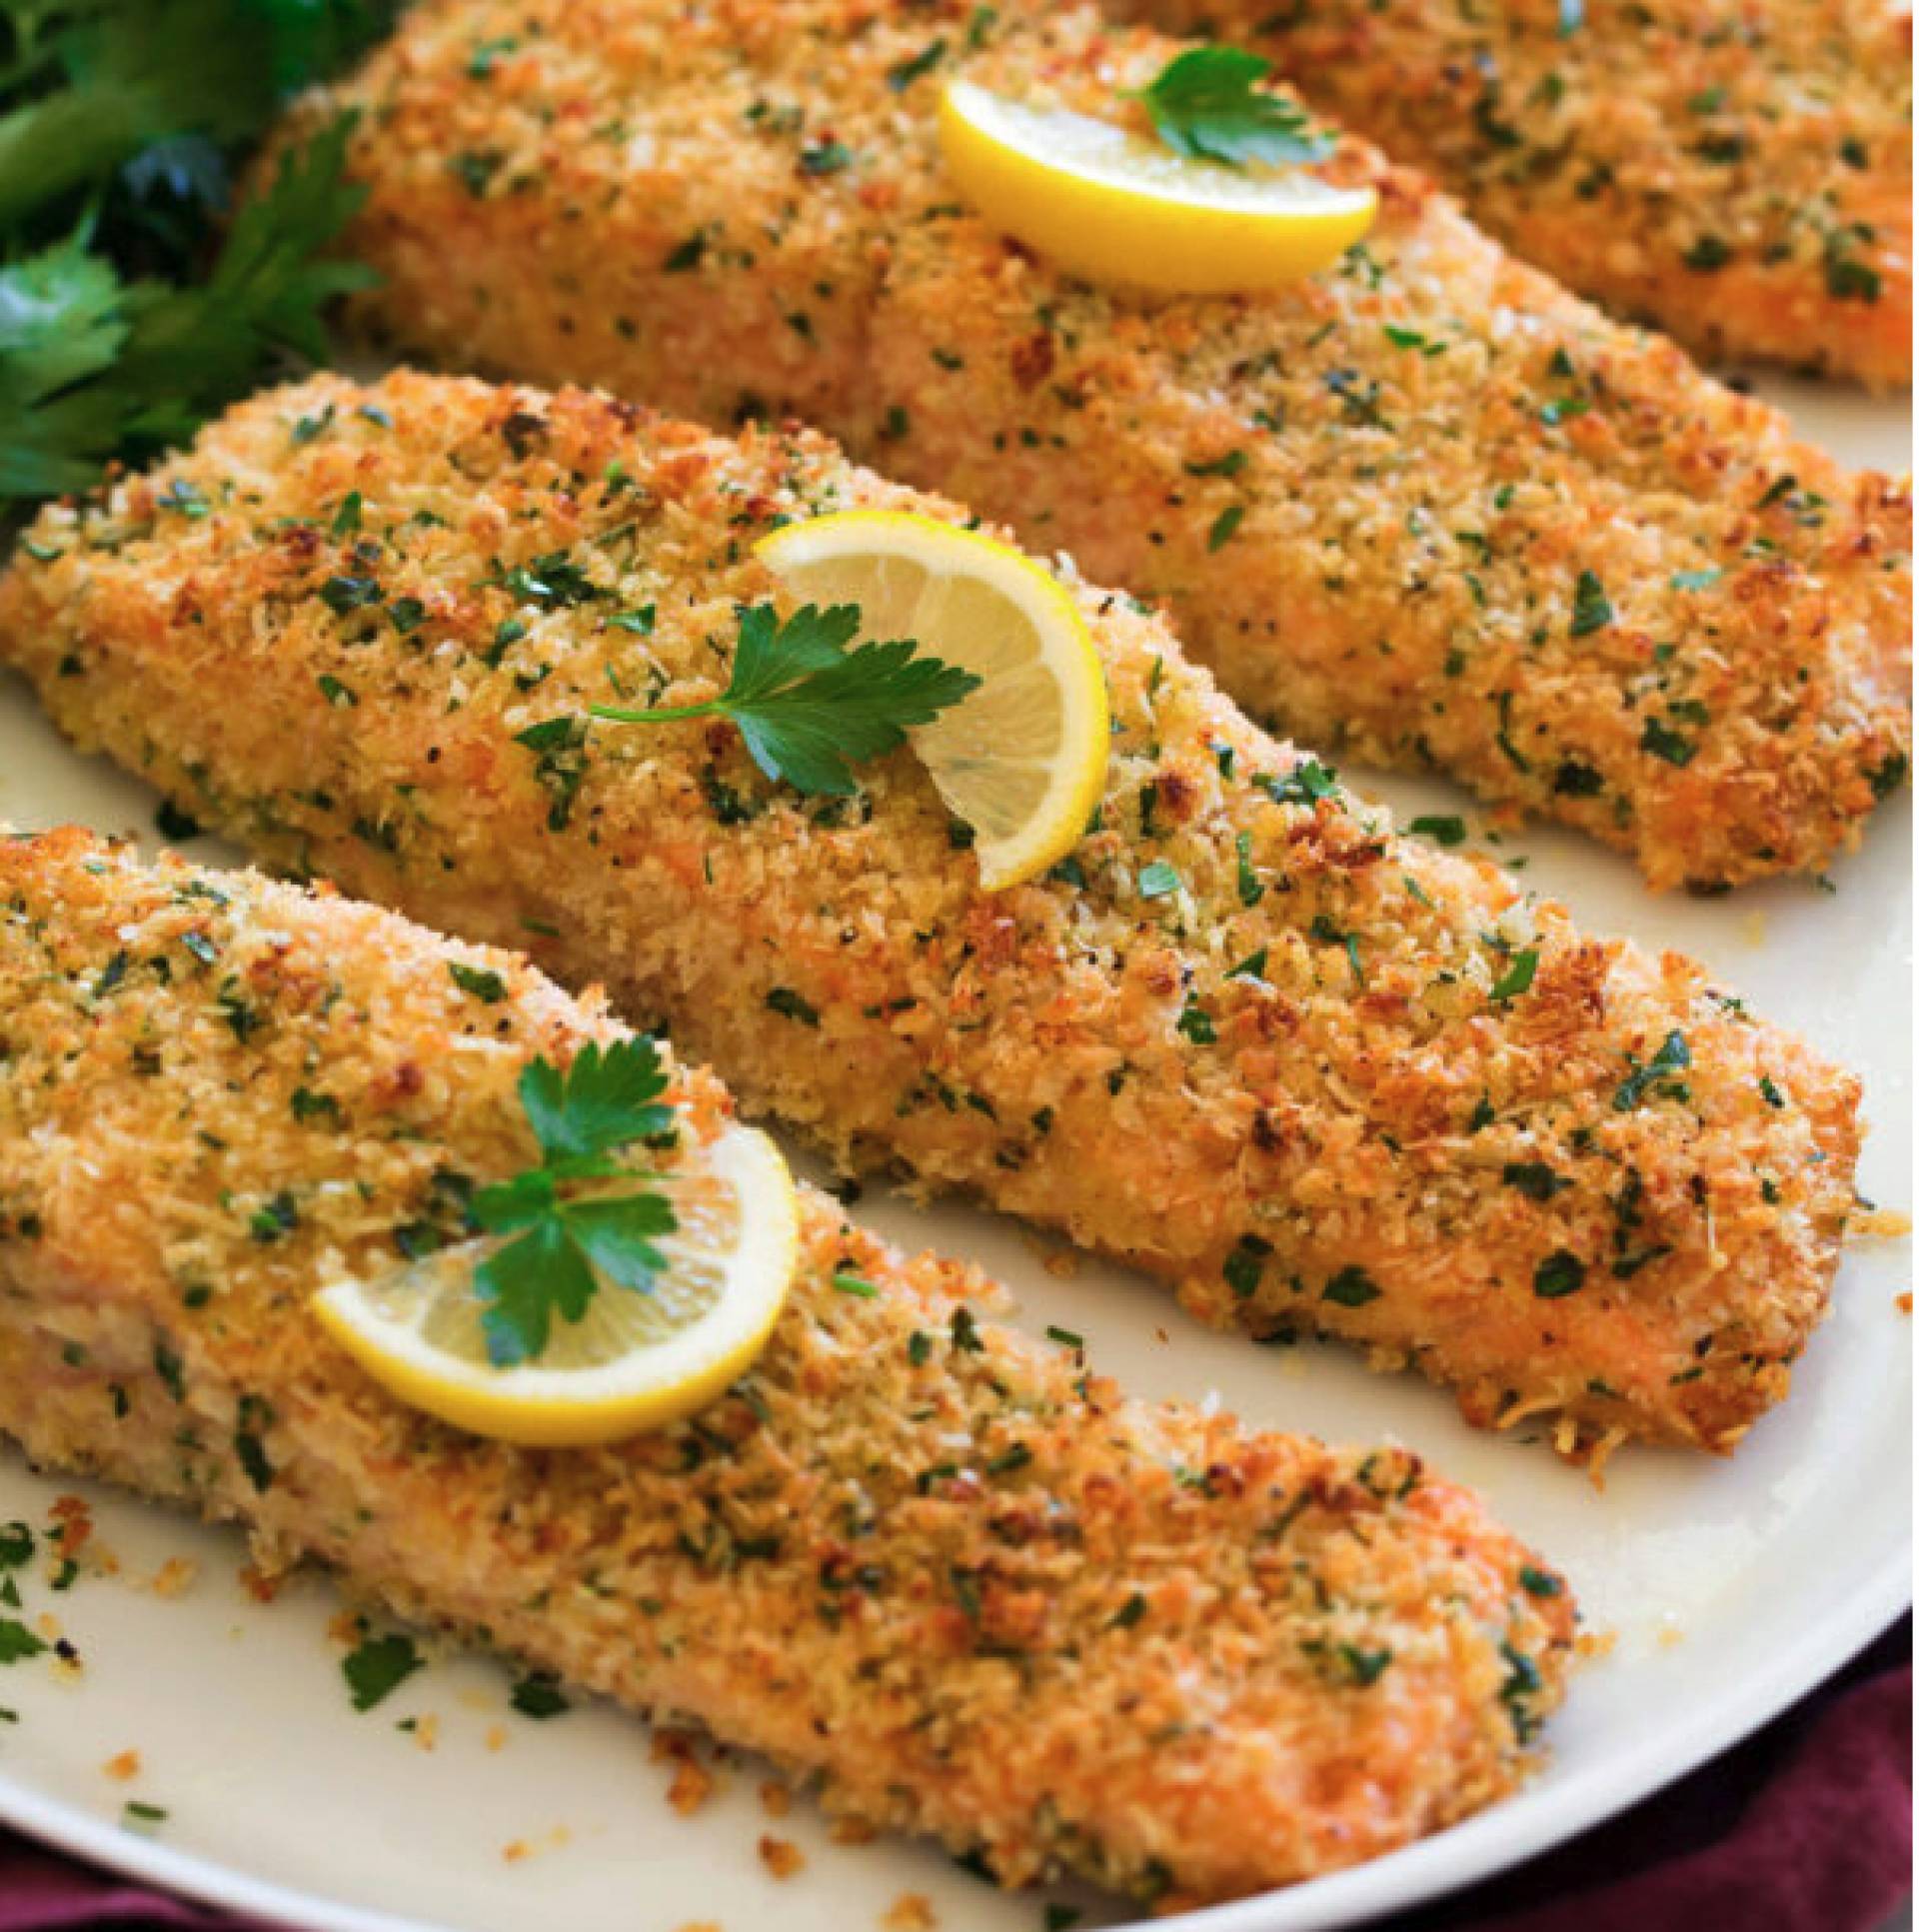 Baked Parmesan Herb Crusted Salmon